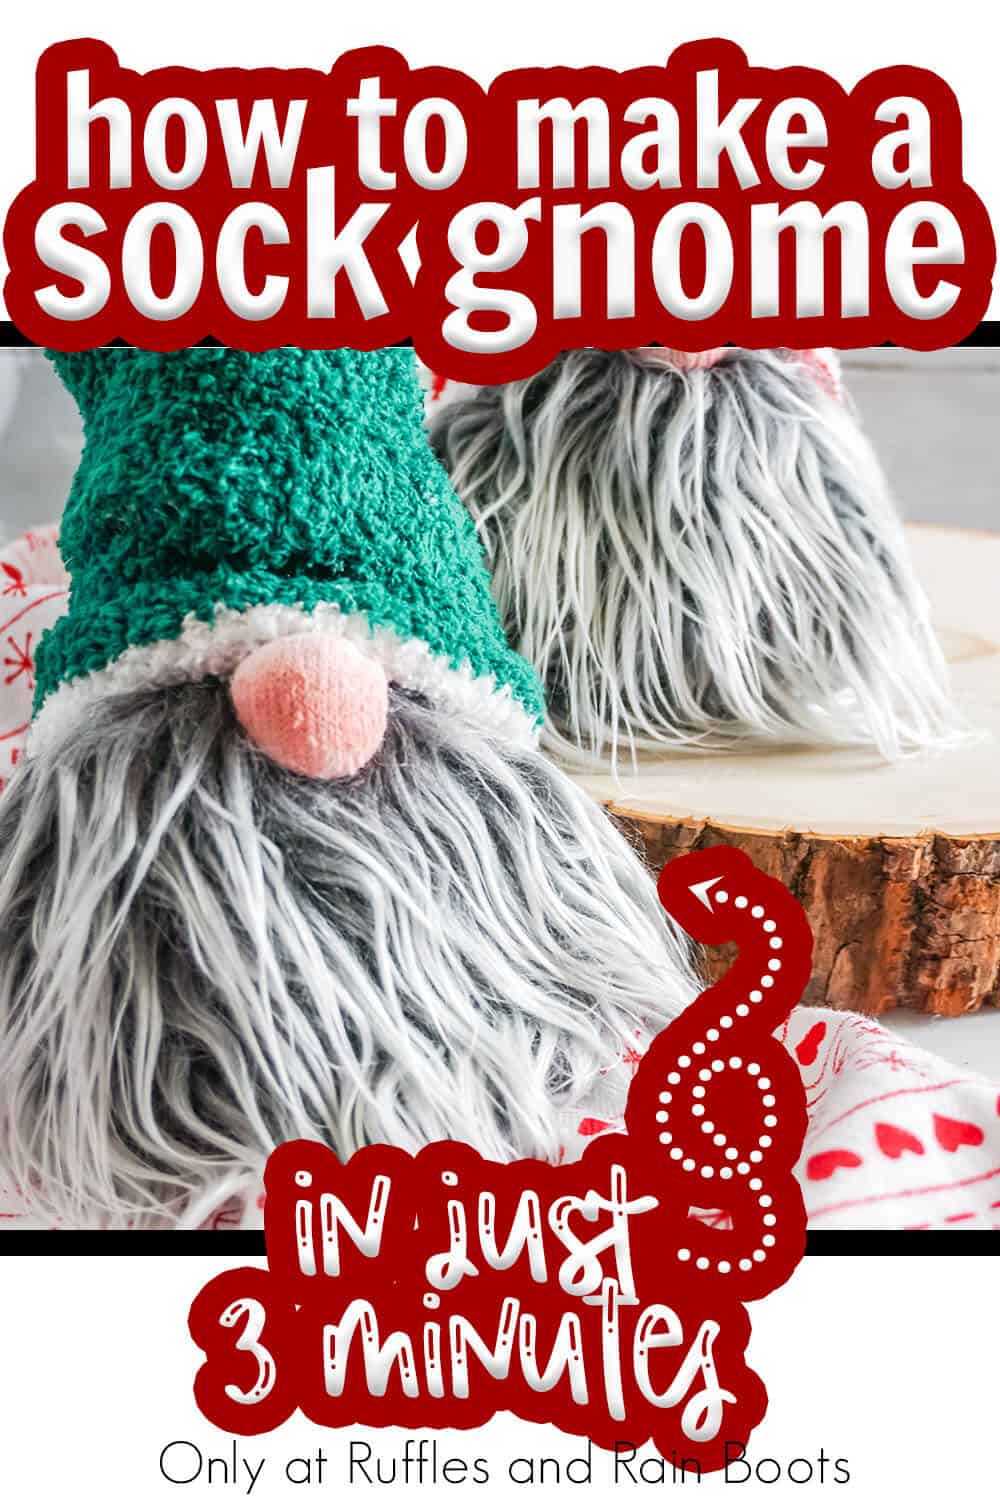 fastest sock gnome you can make with text which reads how to make a sock gnome in just 3 minutes